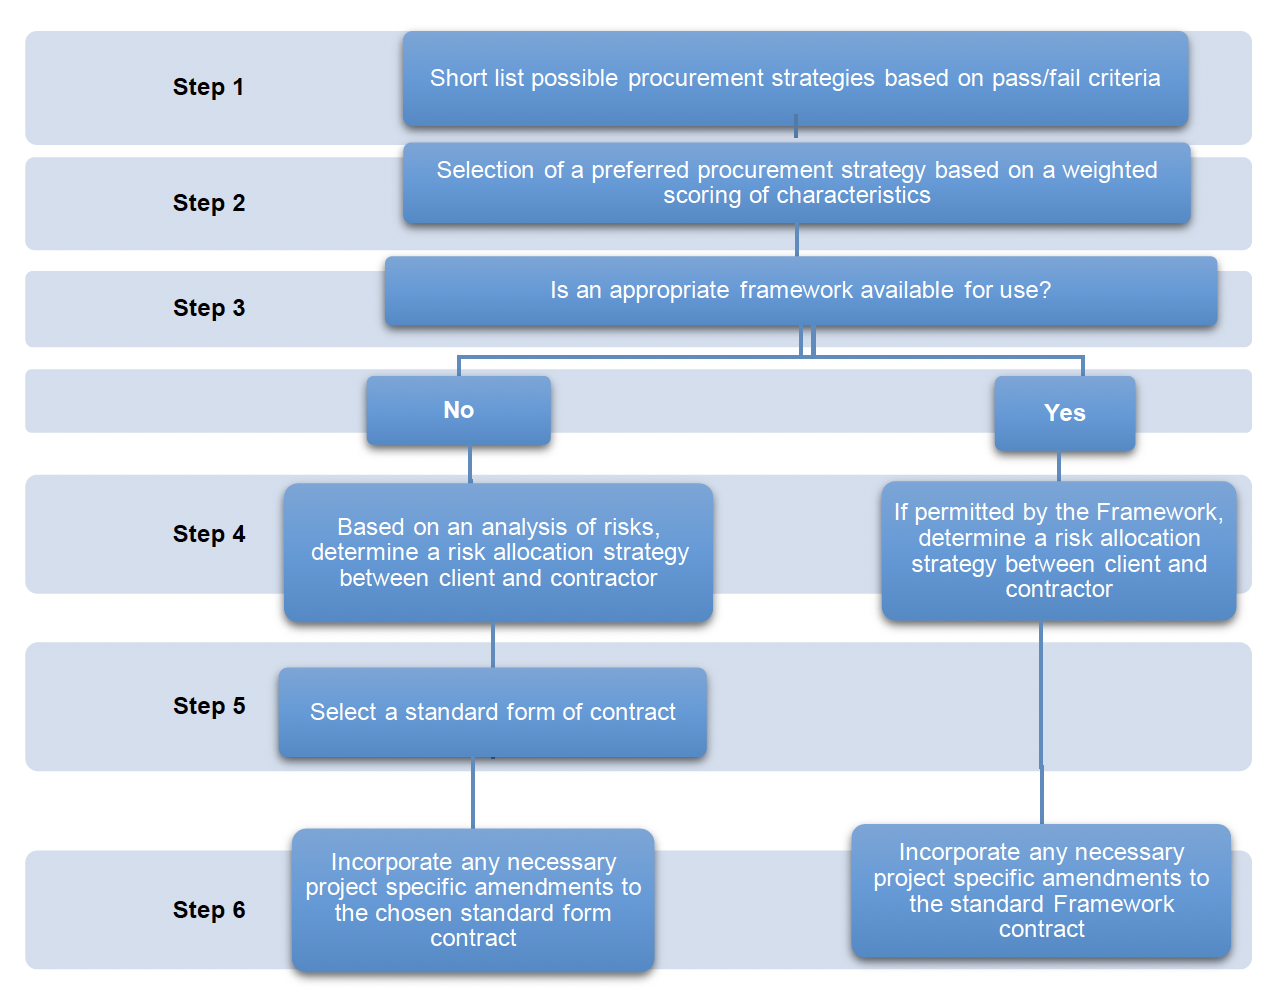 Table describing a suggested approach for selecting a procurement strategy and form of contract